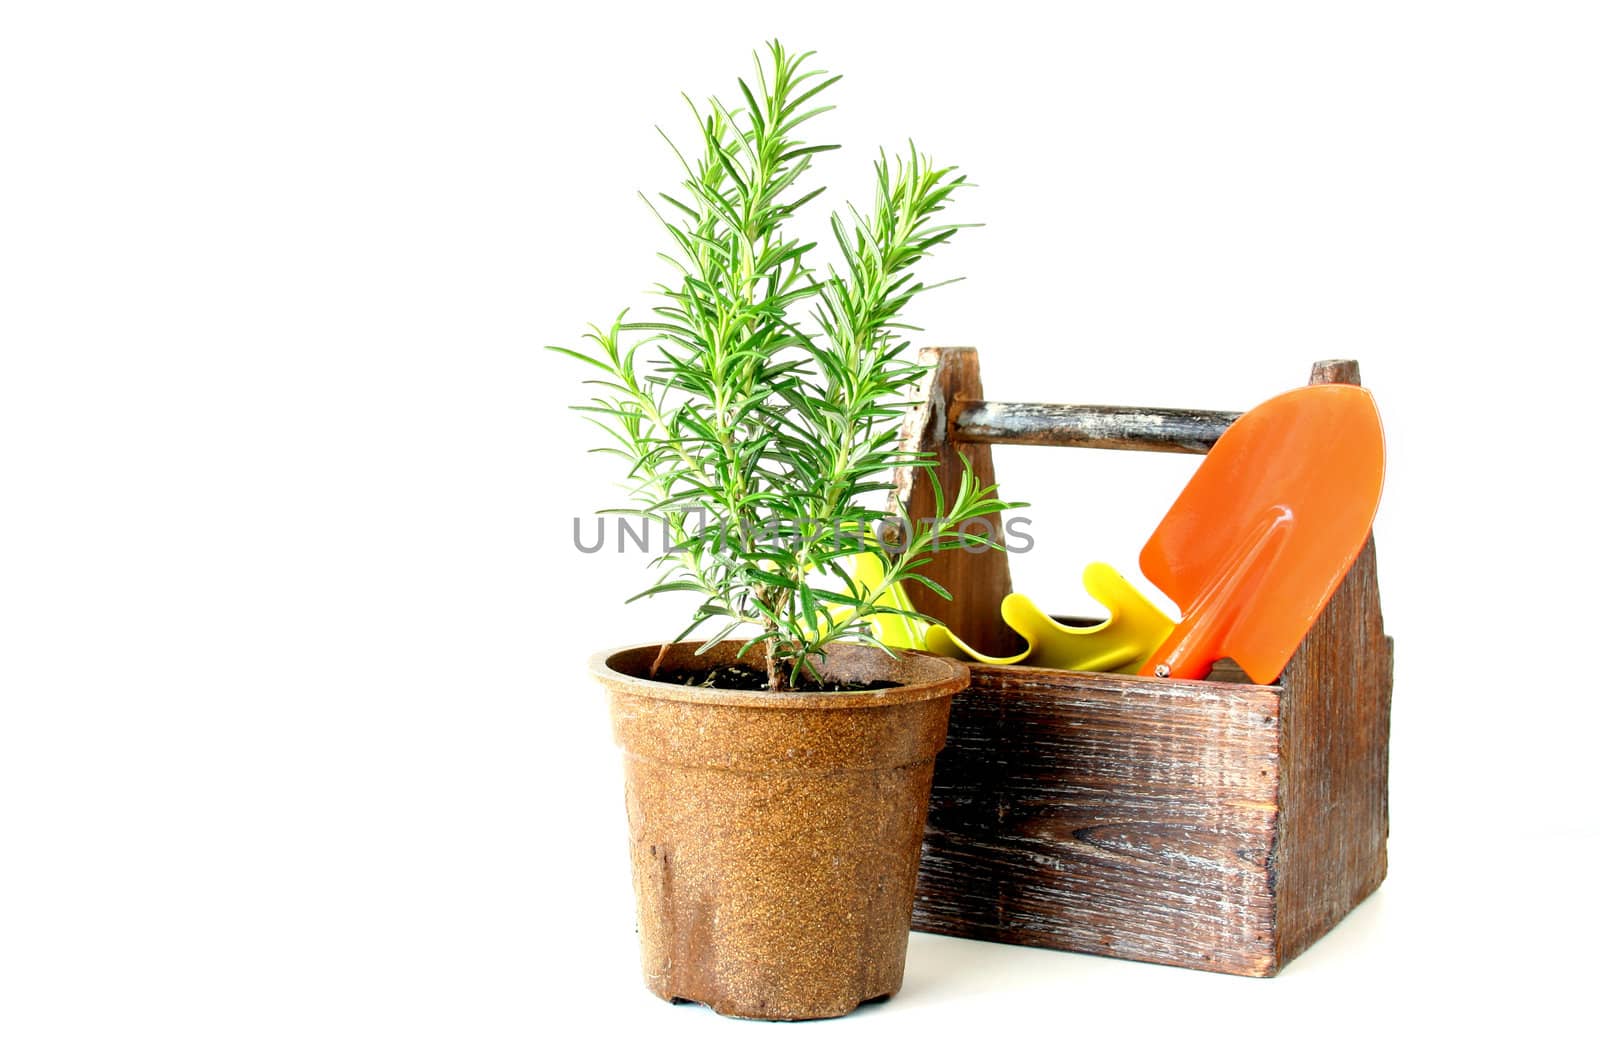 The Herb Rosemary along with garden tools isolated on a white background.